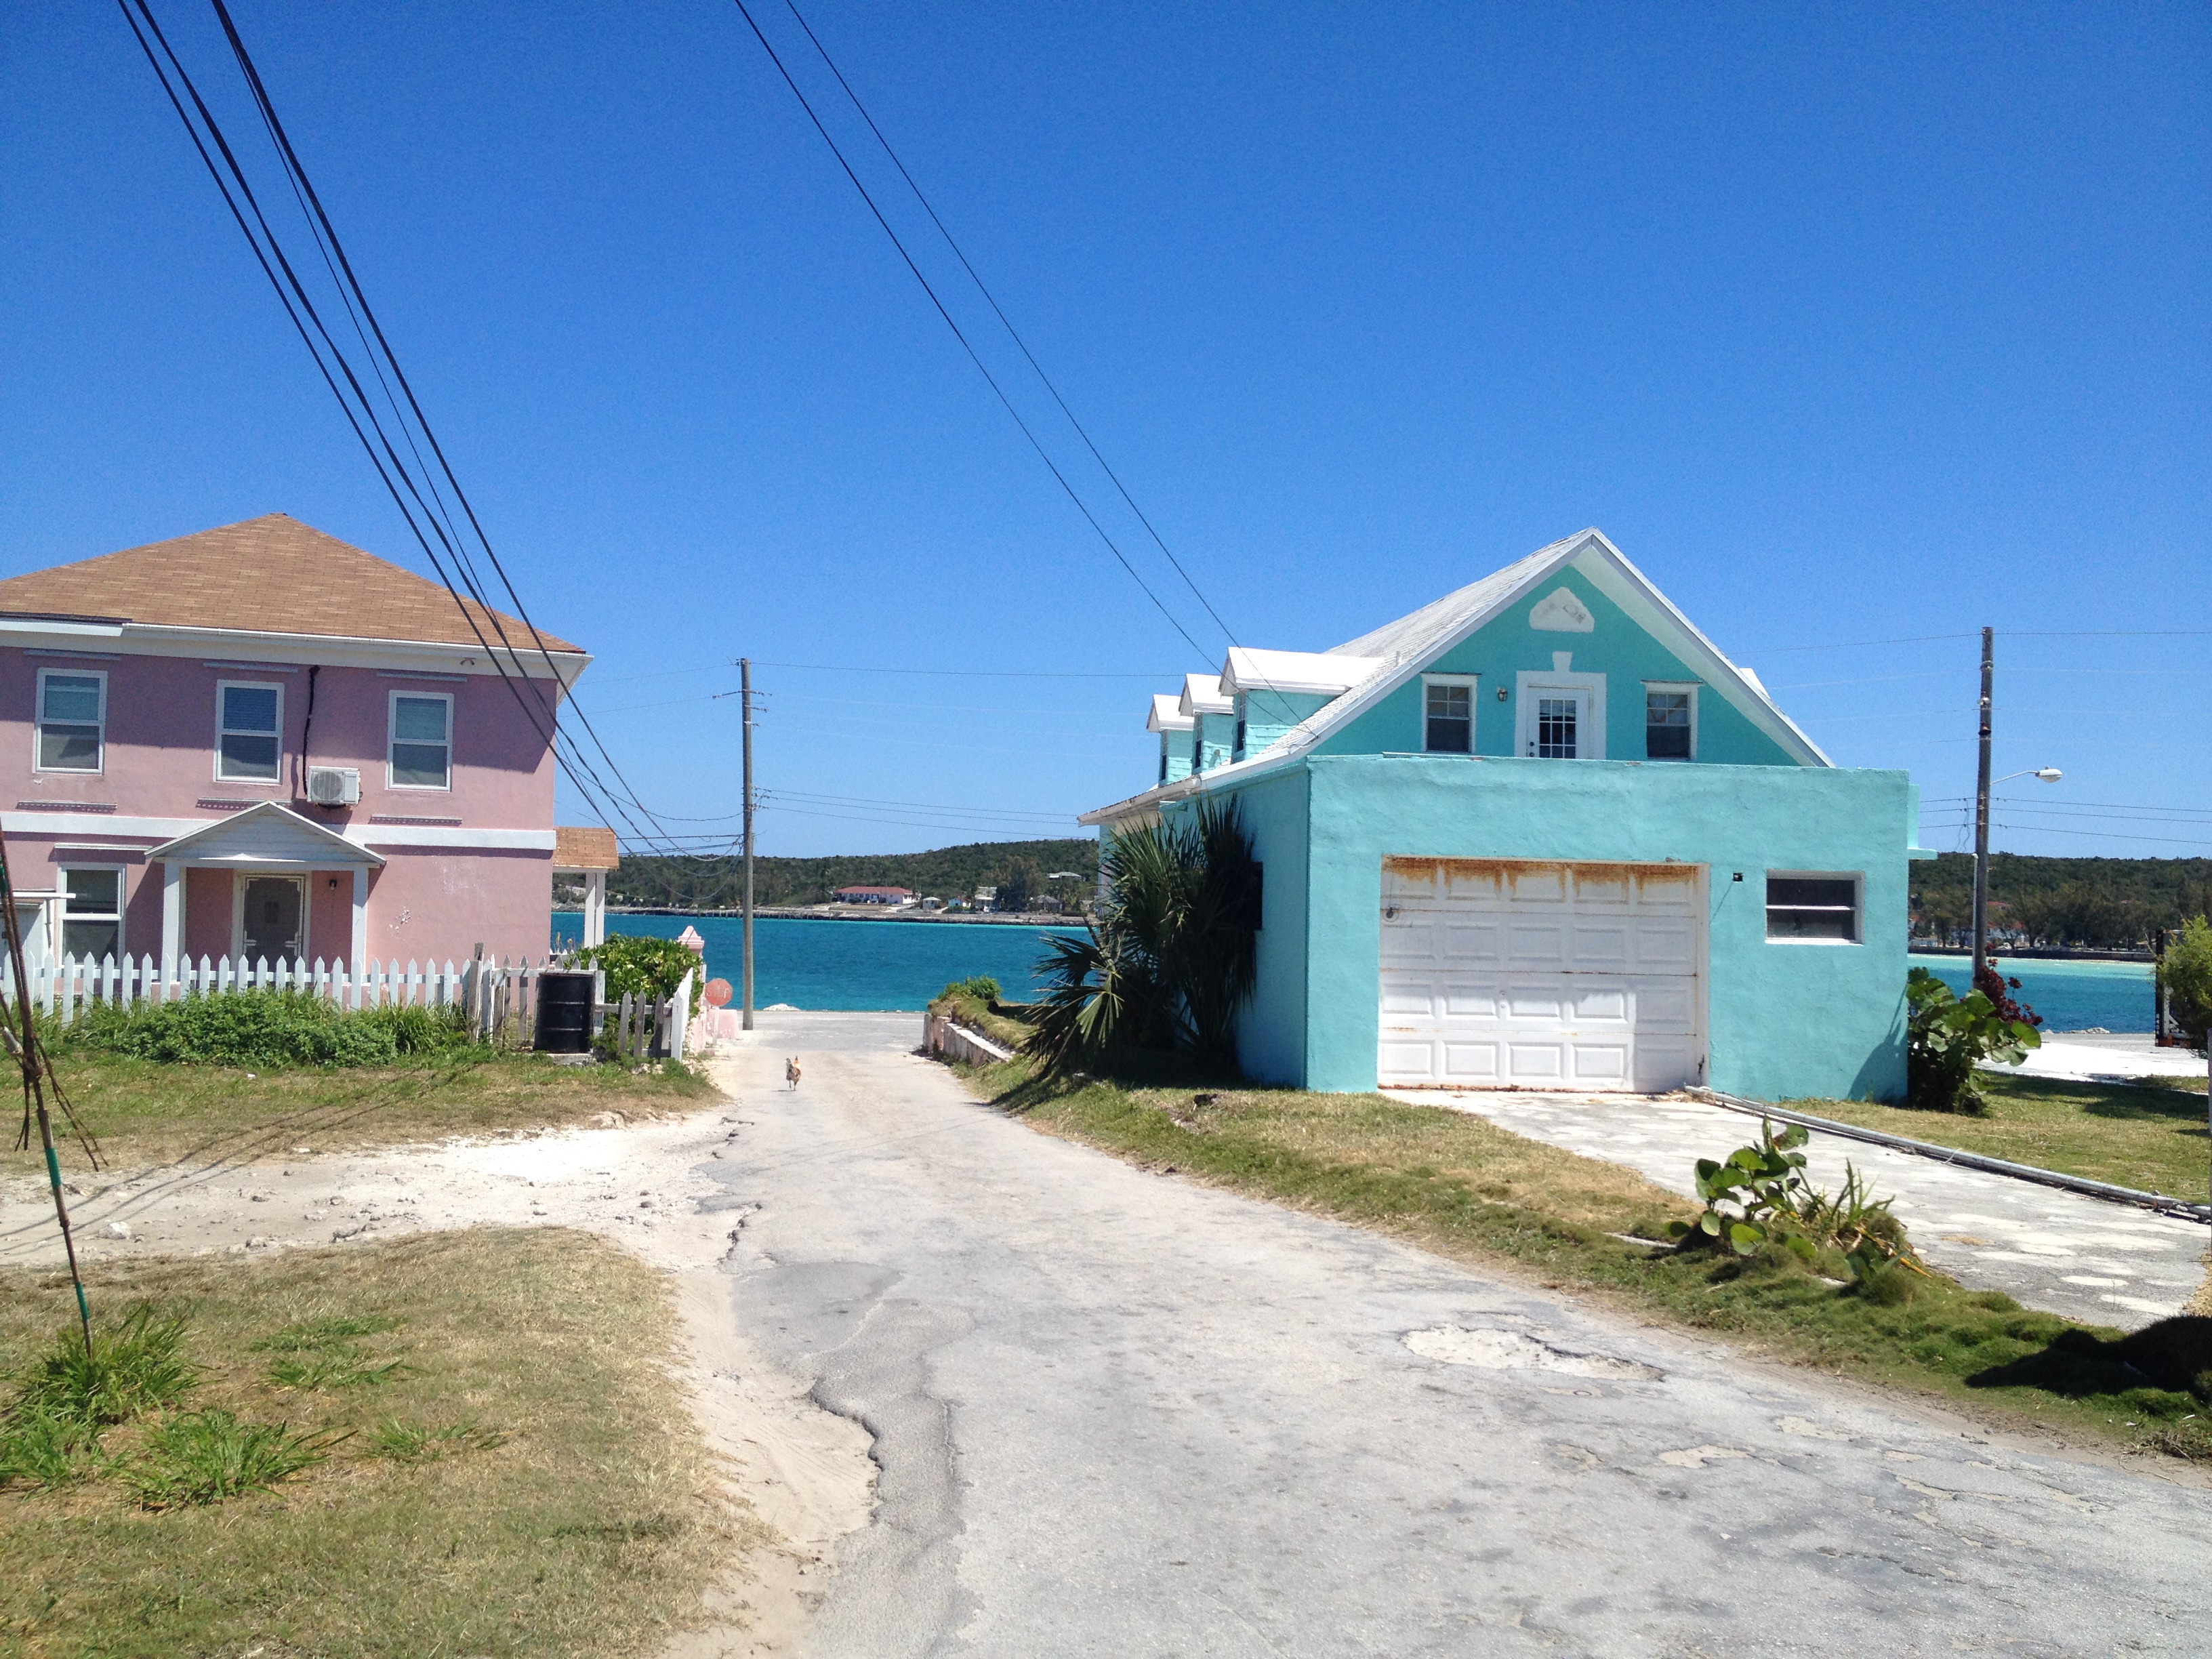 Cupids Cay in Governors Harbour